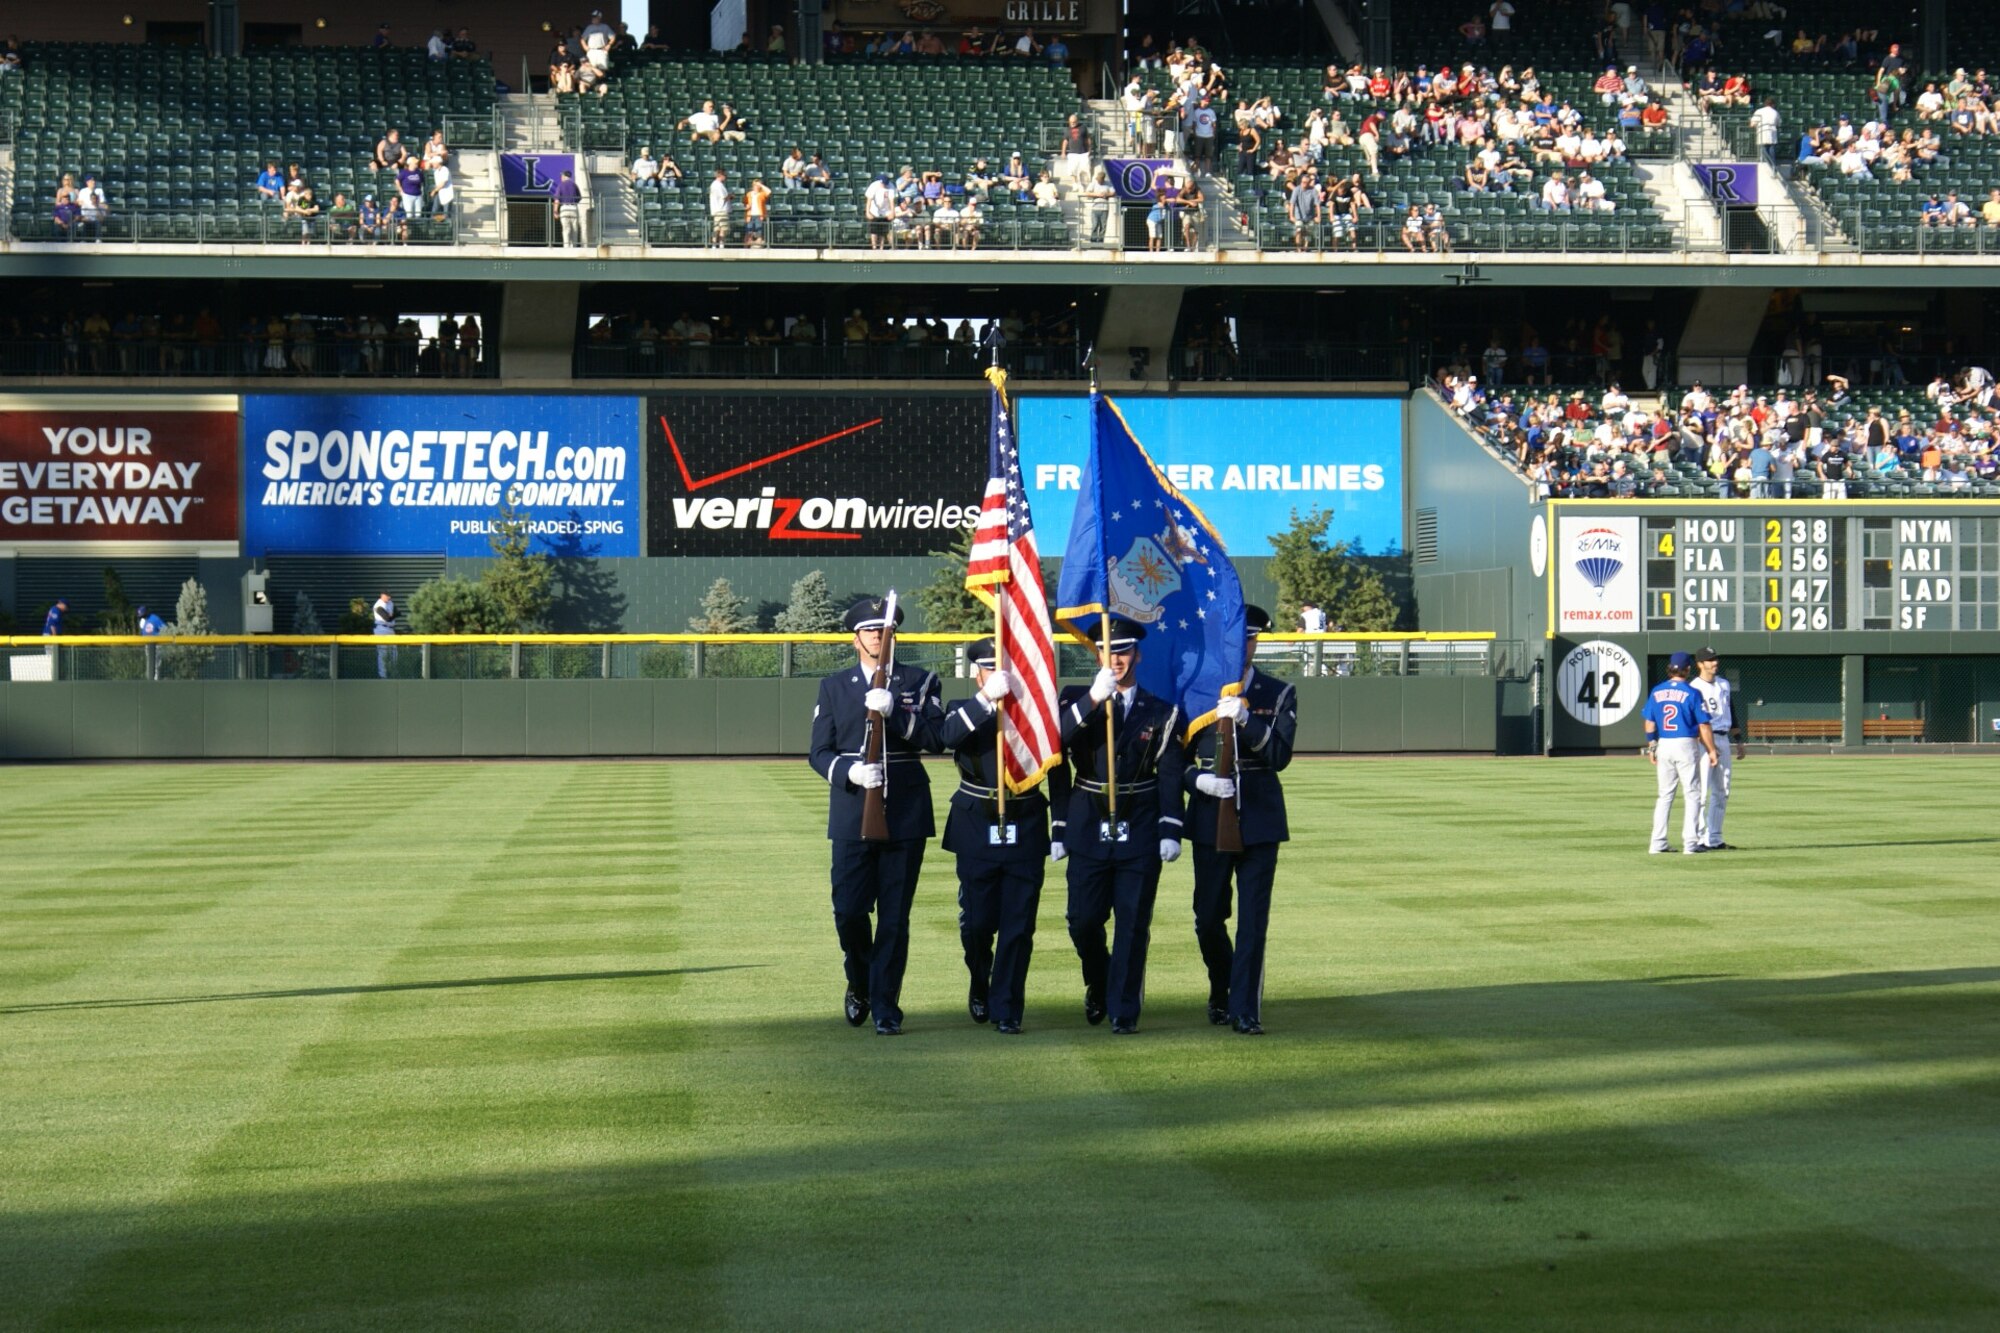 DENVER -- Presenting the colors Aug. 10 at a Rockies vs. Cubs game at Coors Field in Denver are (in no particular order) Tech. Sgt. Edward Wise, Staff Sgt. Joshua Petersen and Airmen 1st Class Kevin Scott and Samuel Wenrich, members of the Mile High Honor Guard at Buckley Air Force Base, Colo. The Mile High Honor Guard is composed of volunteers from many different career fields across Buckley. (U.S. Air Force photo)